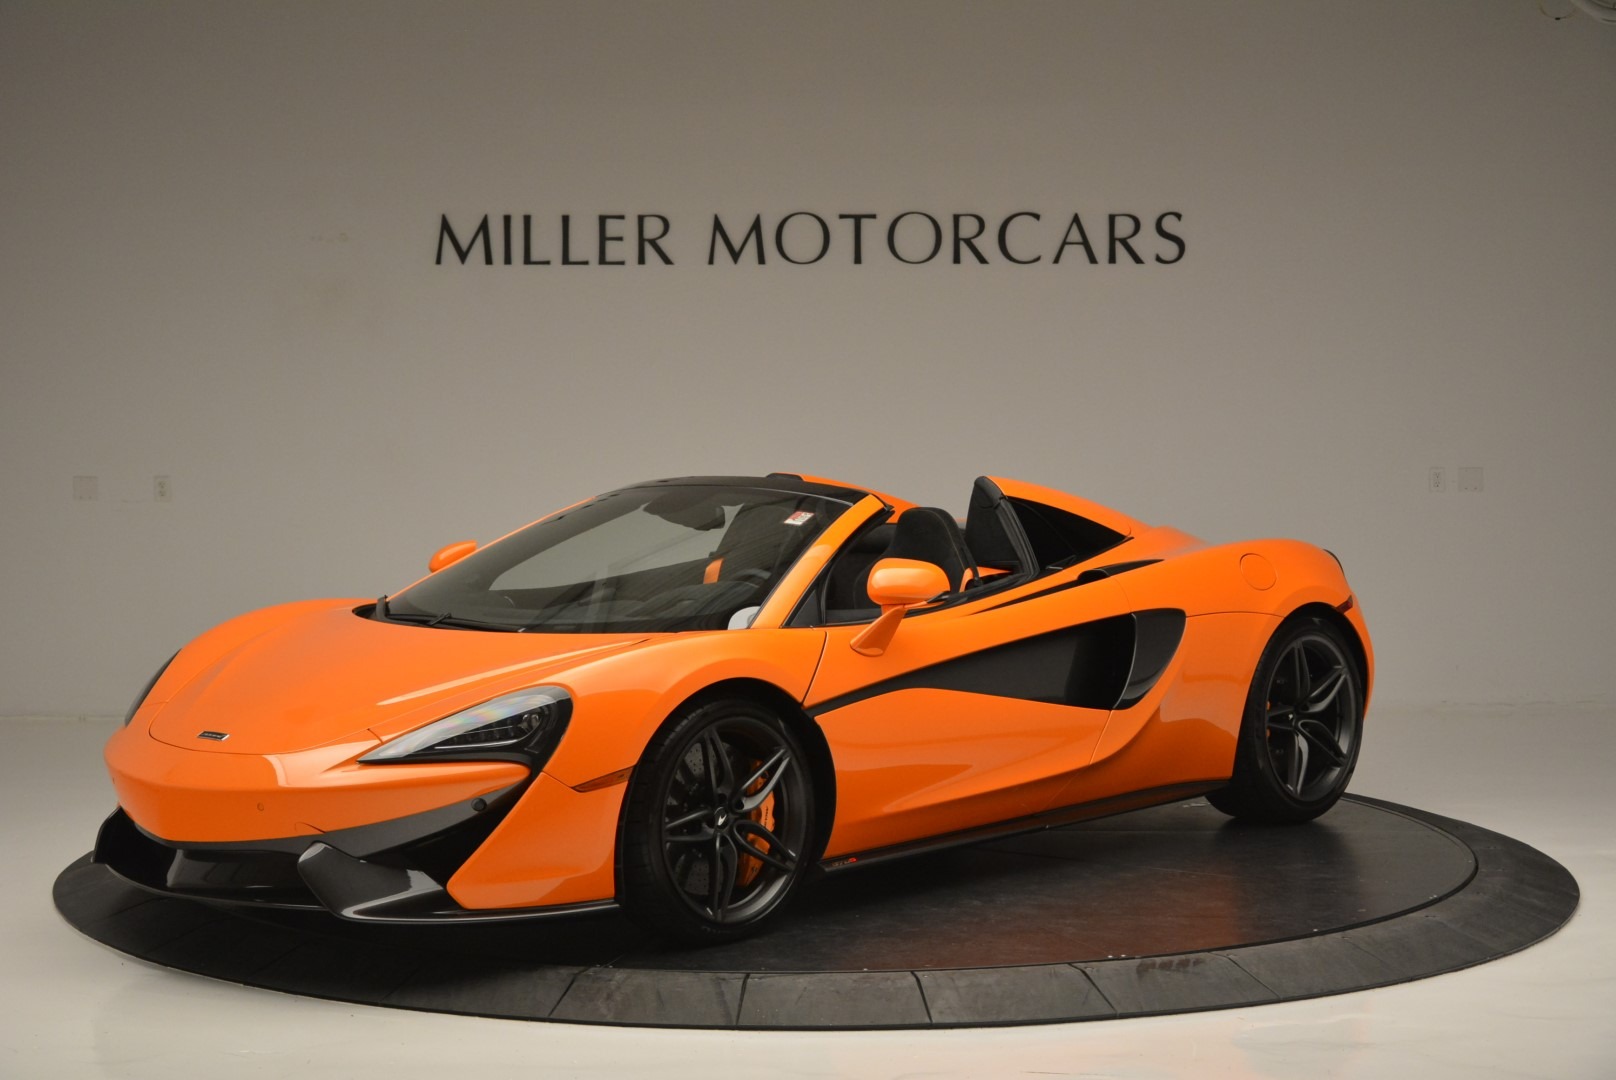 New 2019 McLaren 570S Spider Convertible for sale Sold at Pagani of Greenwich in Greenwich CT 06830 1